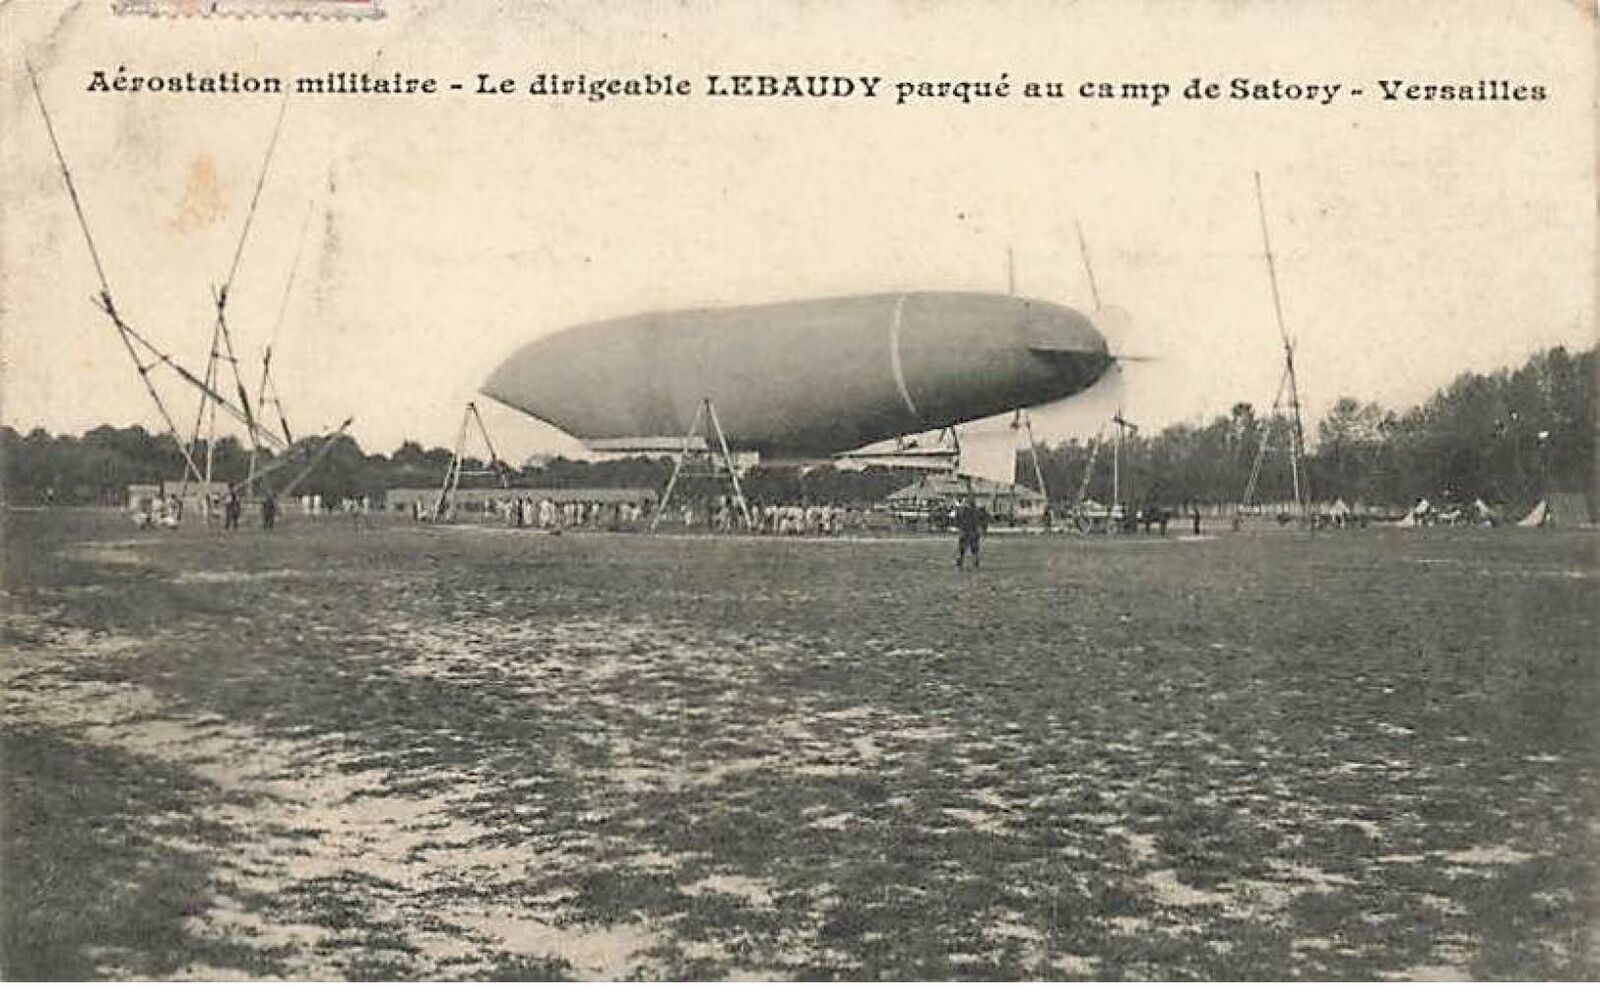 Transport - Military Aerostation - Le Irigeable Lebaudy Parked at Camp